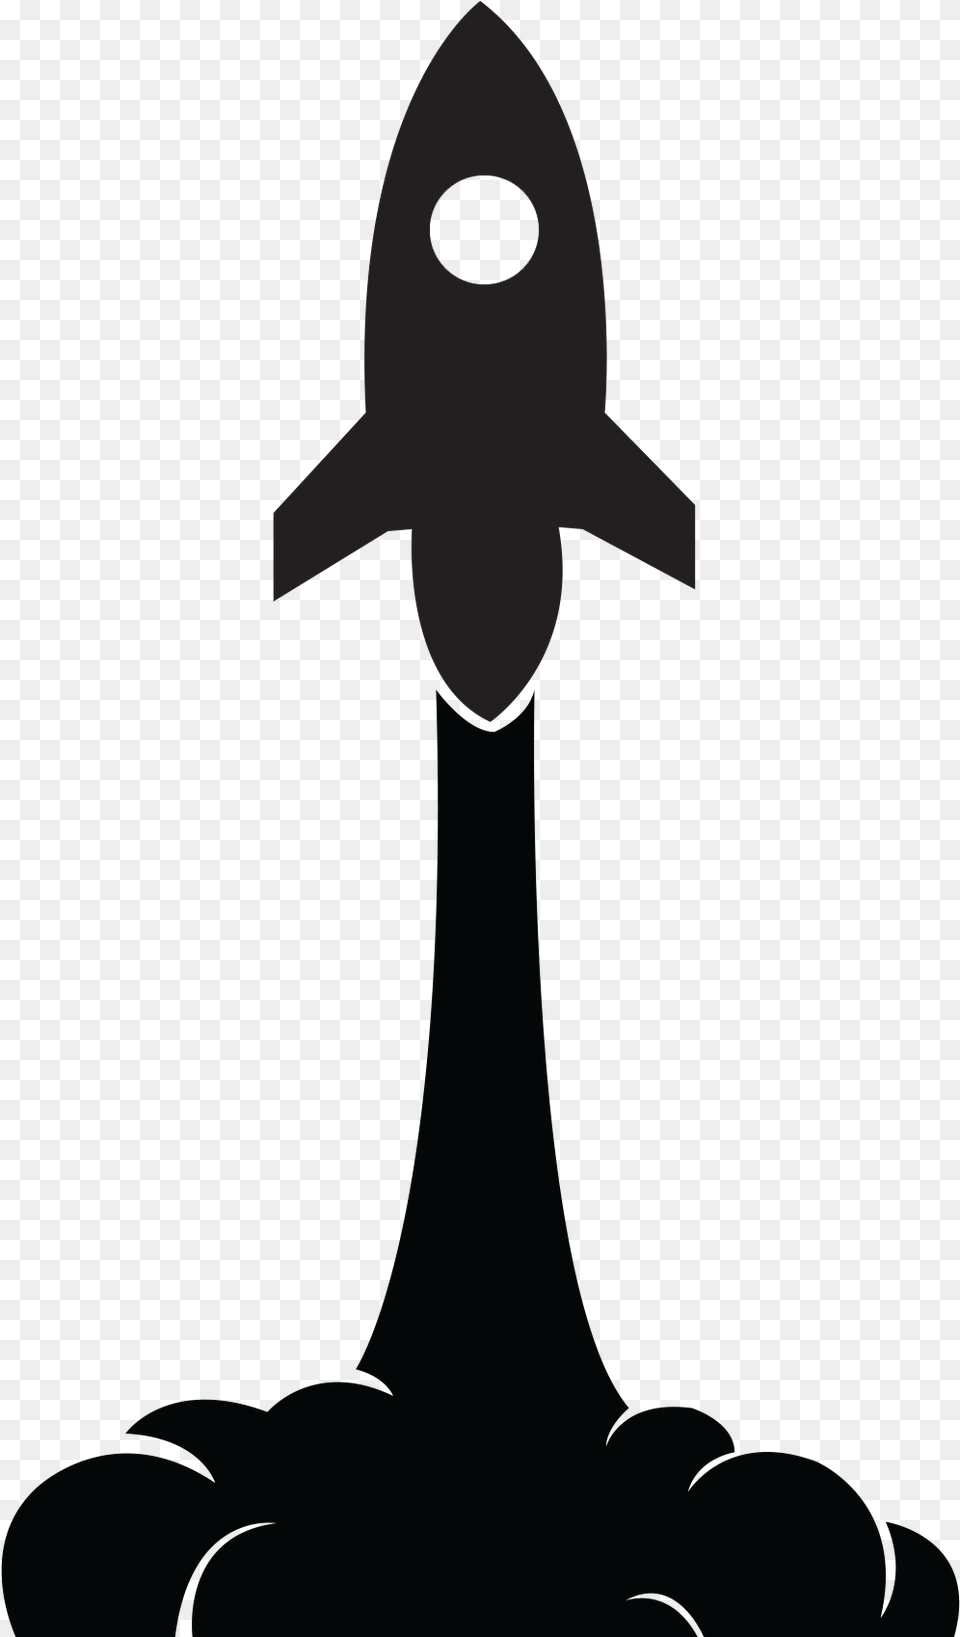 Rocket Blast Off Silhouette Hd Silhouette Rocket, Ammunition, Missile, Weapon Png Image